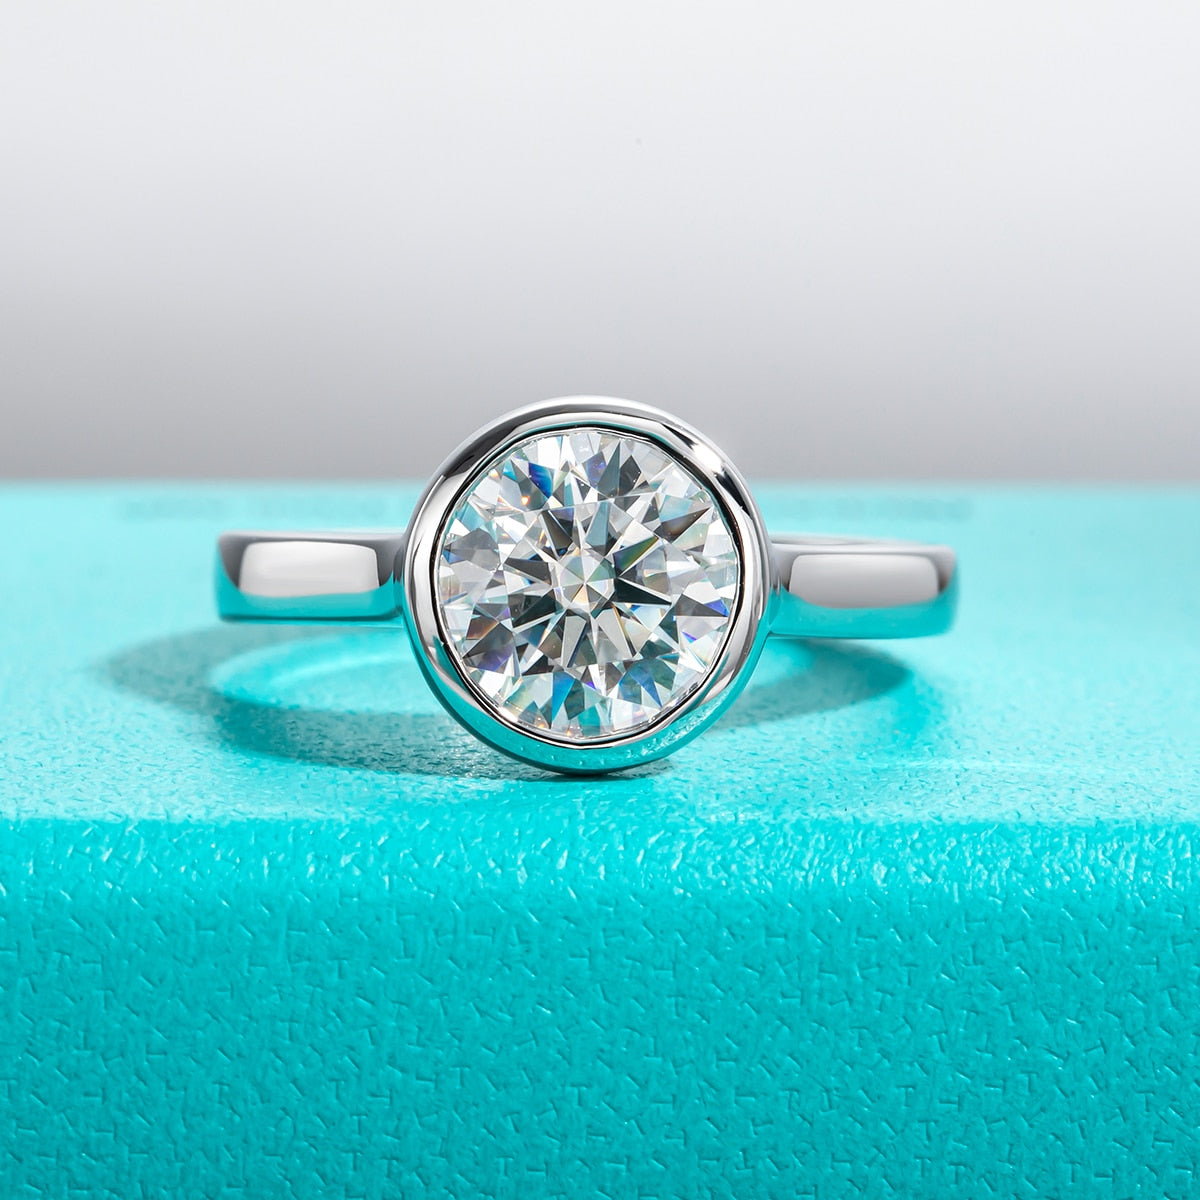 A sterling silver engagement ring with a 3CT round cut moissanite in a bezel setting.